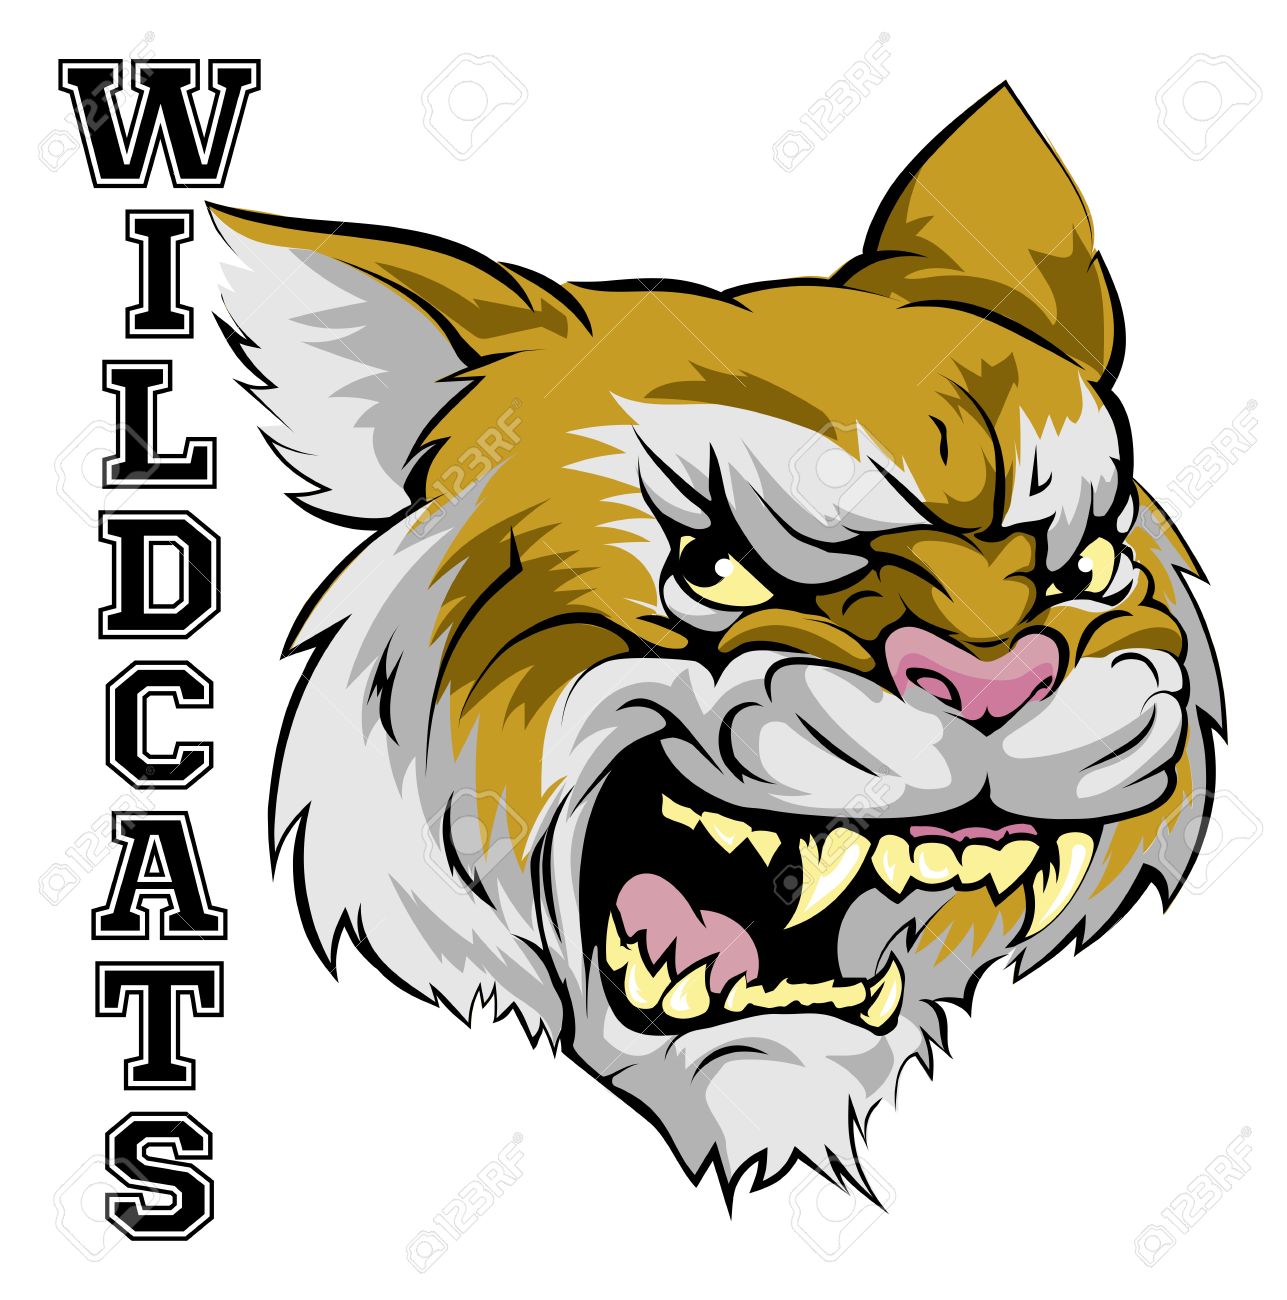 Wildcat clipart animated. Free download clip art